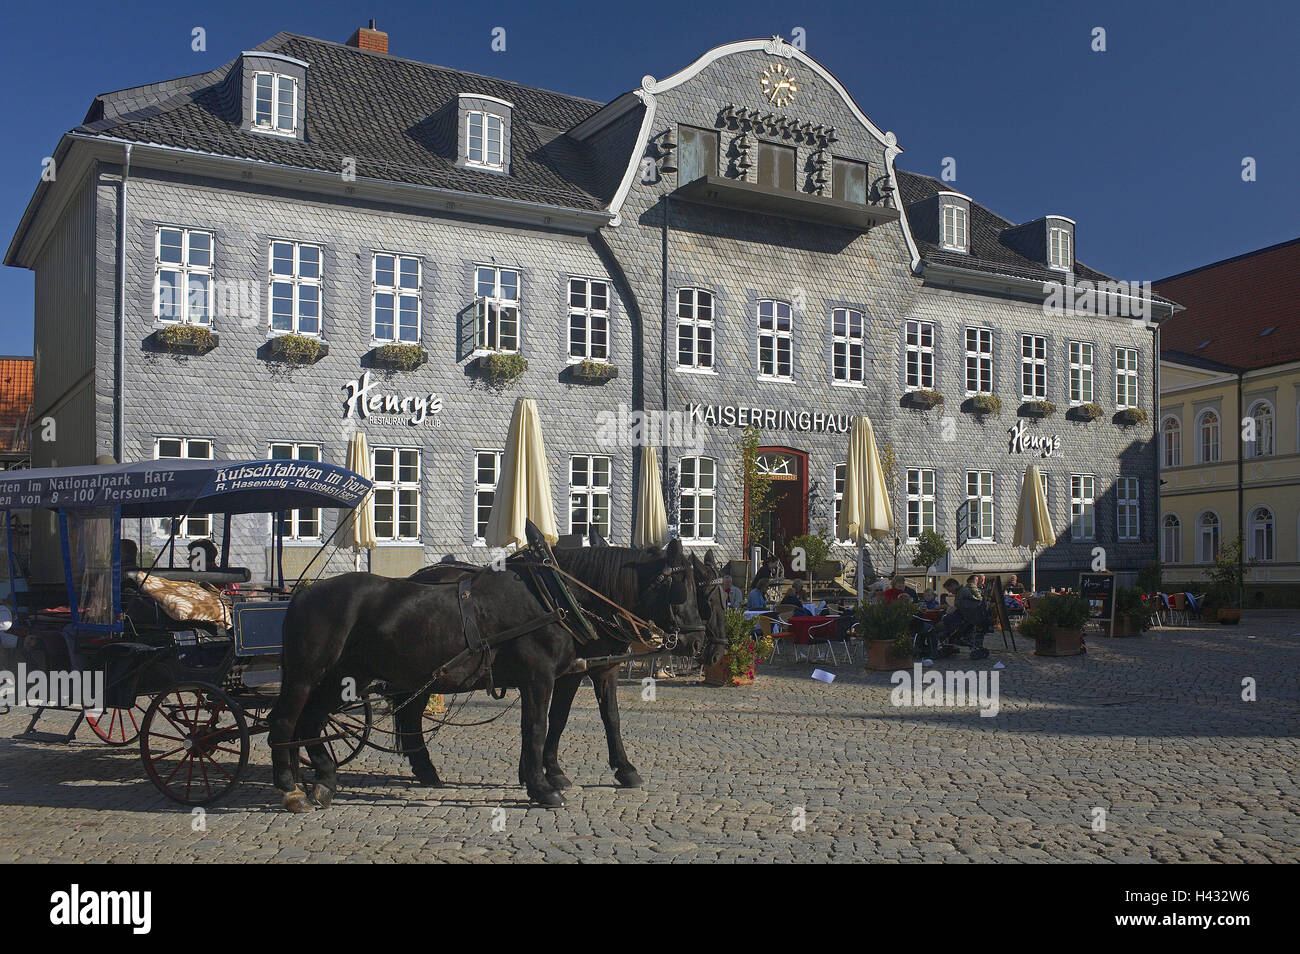 Germany, Lower Saxony, Harz, Goslar, marketplace, emperor's ring house, horse's carriage, town, Old Town, city centre, imperial city, city centre, space, town view, gastronomy, street restaurant, house, building, carillon, shingle facade, restaurant, carriage, city tour, round trip, Kutschfahrt, tourism, historically, architecture, cobblestones, person, guests, tourists, place of interest, Stock Photo